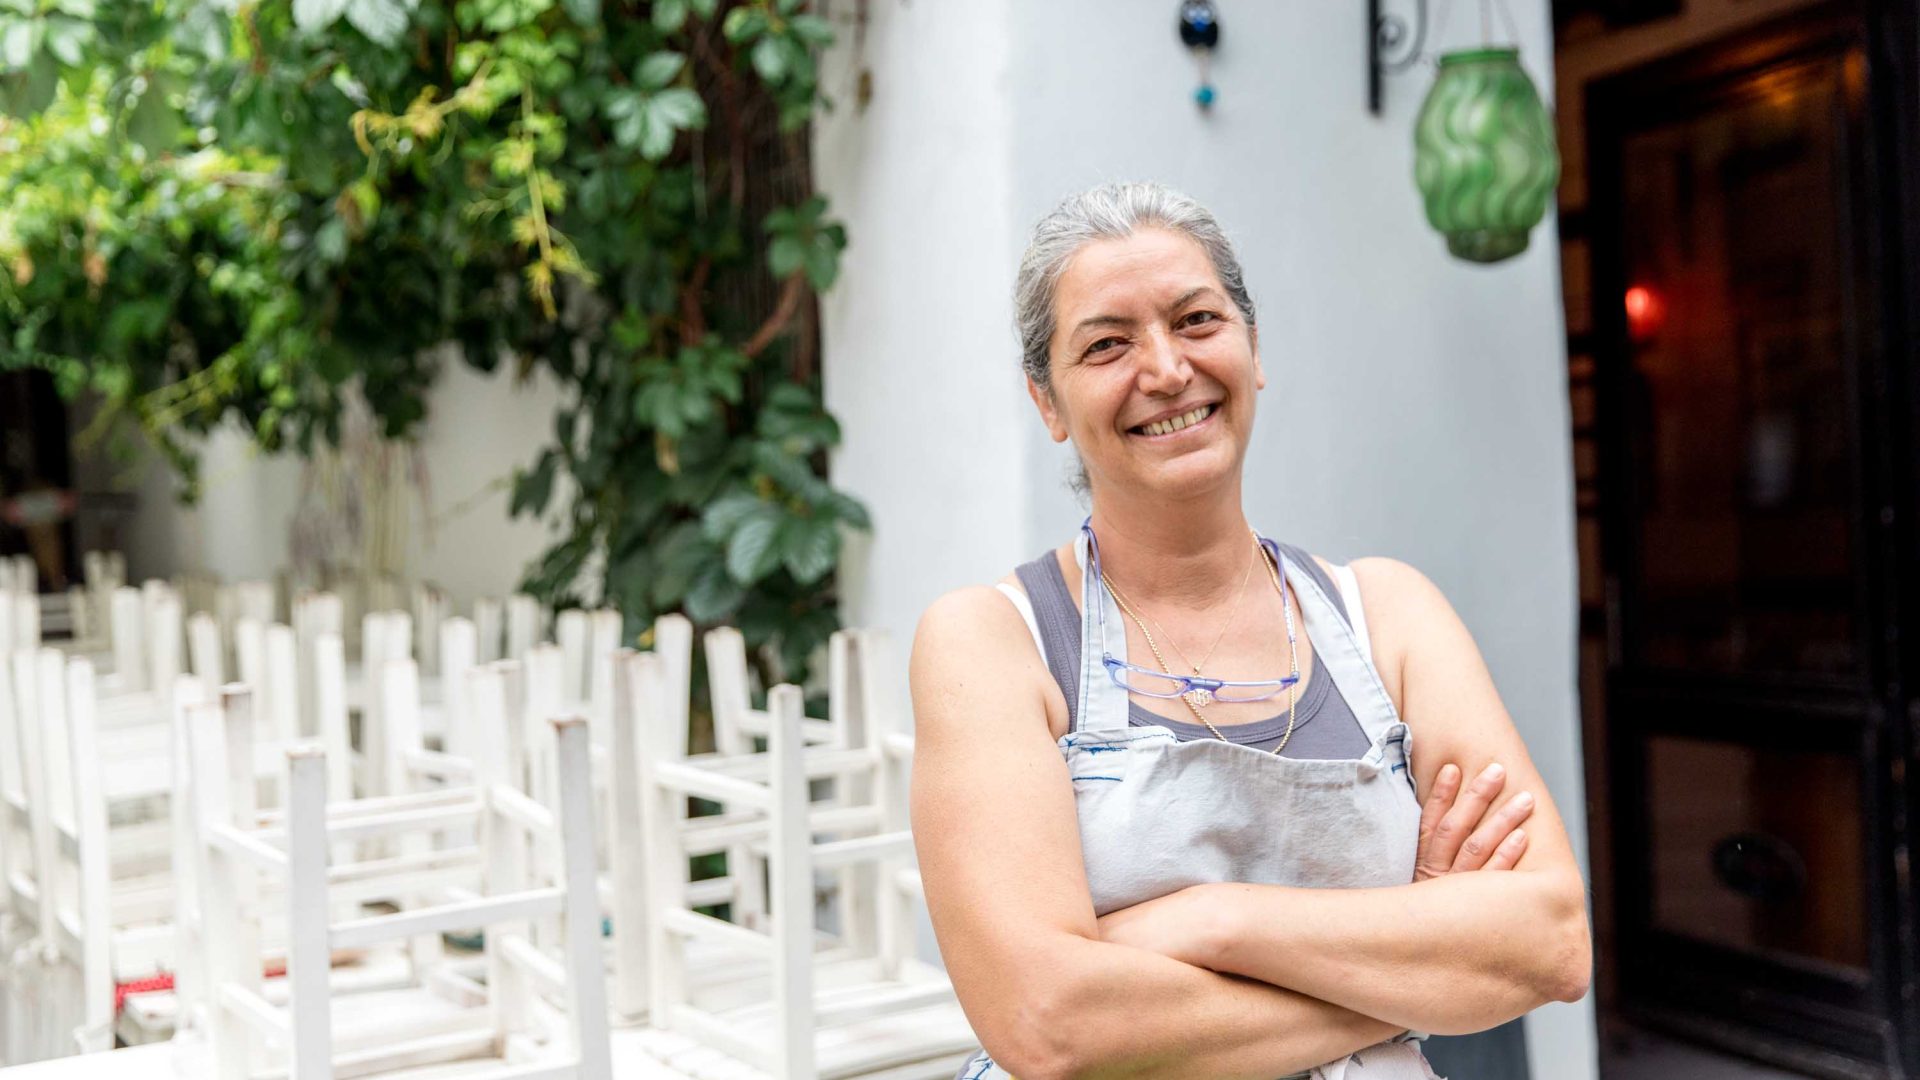 Yvalik, an owner of one of the lunch restaurants smiles with her arms crossed.